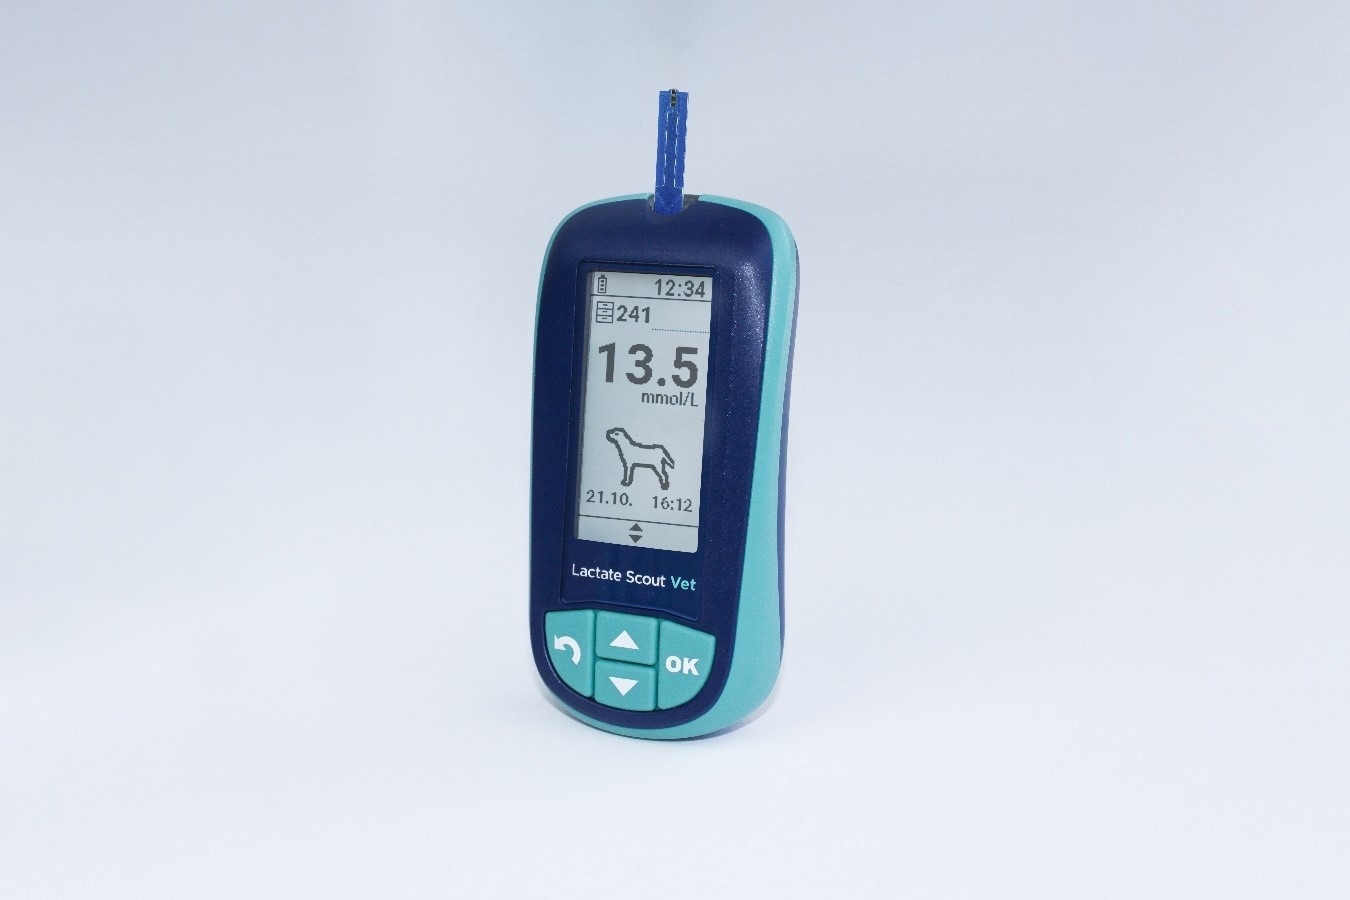 The Lactate Scout Vet features species selection, making it ideal for rapid lactate measurement in both small and large animal practices. For a high-res image, please contact sarahp@alto-marketing.com. Image Credit: EKF